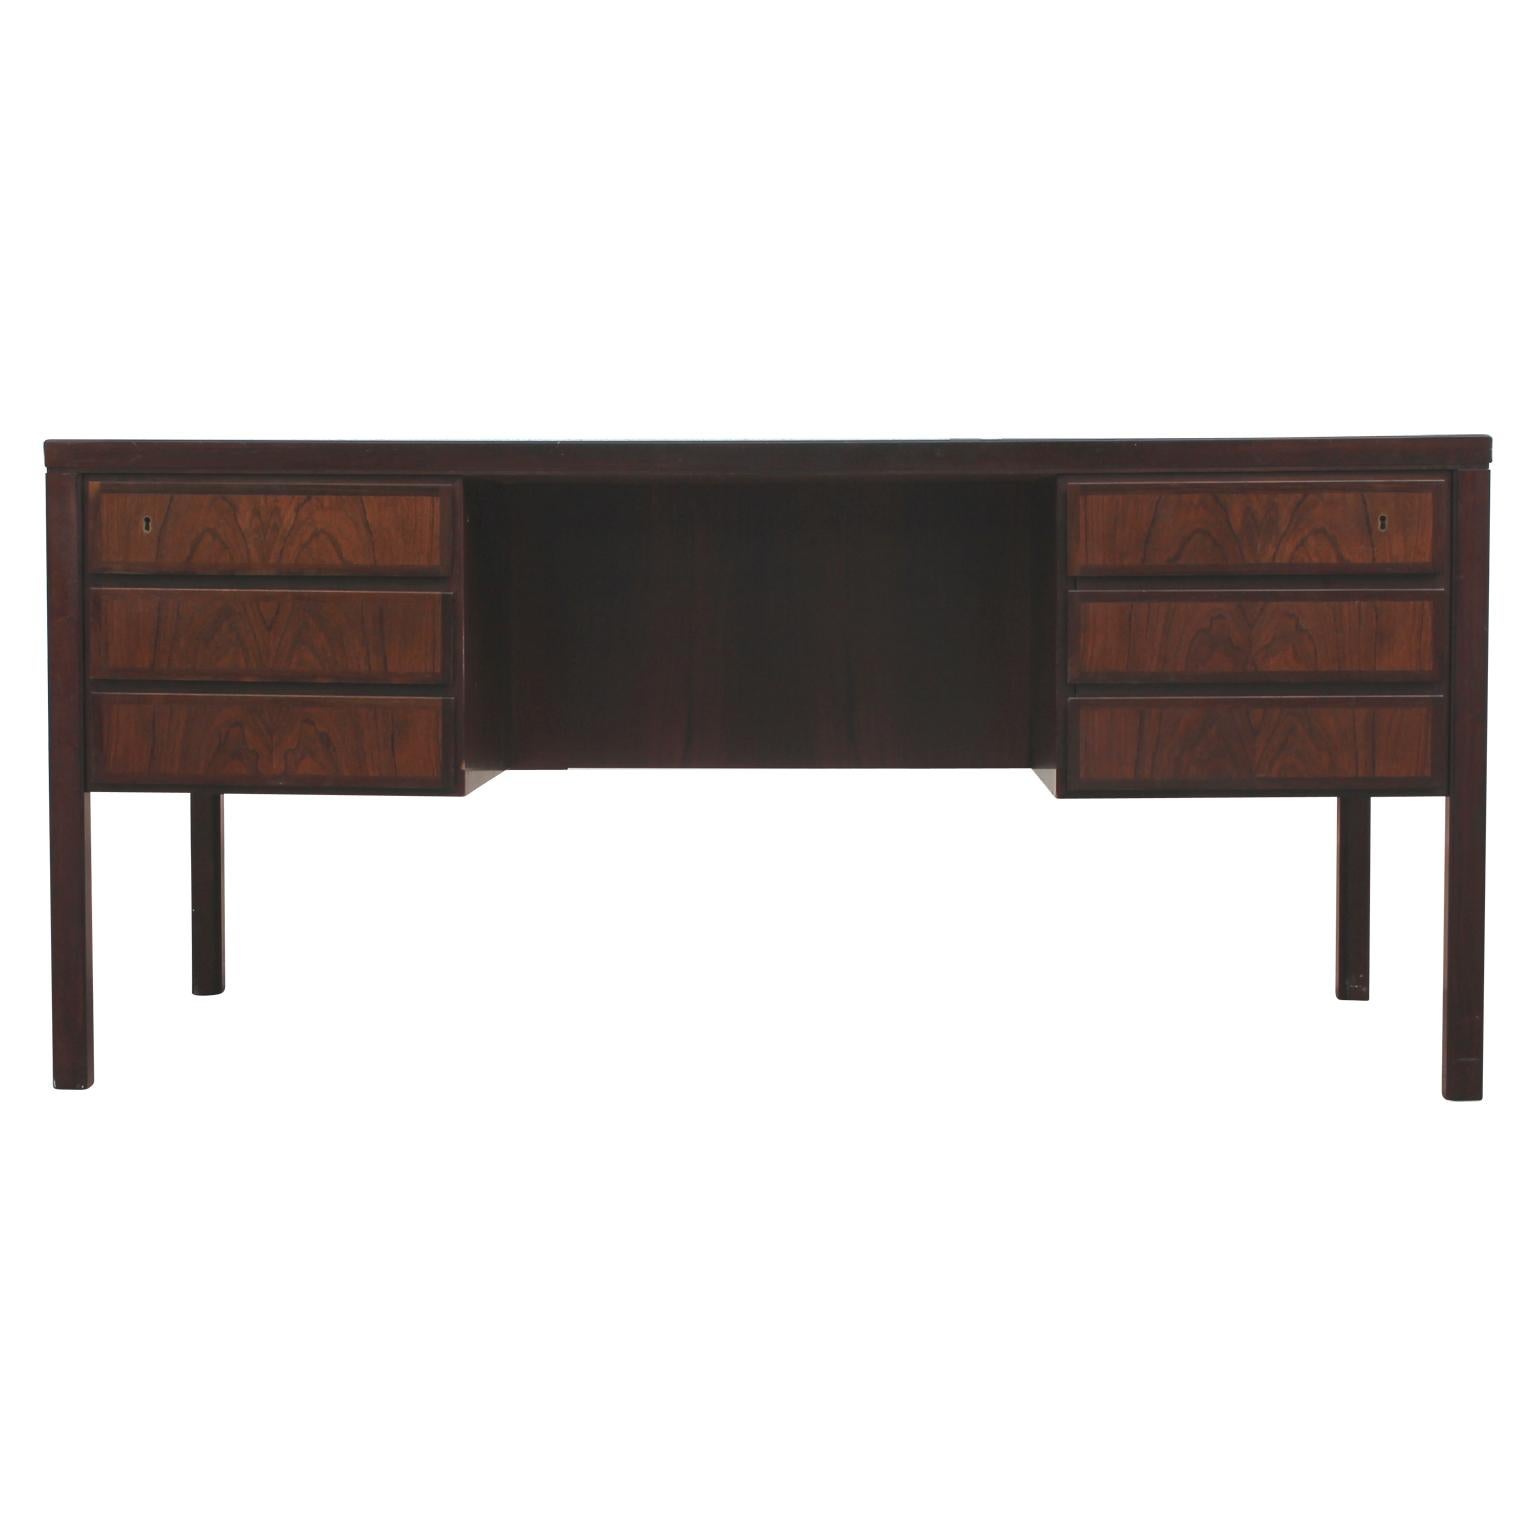 Stunning clean-lined modern Danish rosewood executive desk by Gunni Omann for Omann Jun Møbelfabrik featuring six drawers. The front of the desk features compartments for display as well as a drop down door for additional storage.